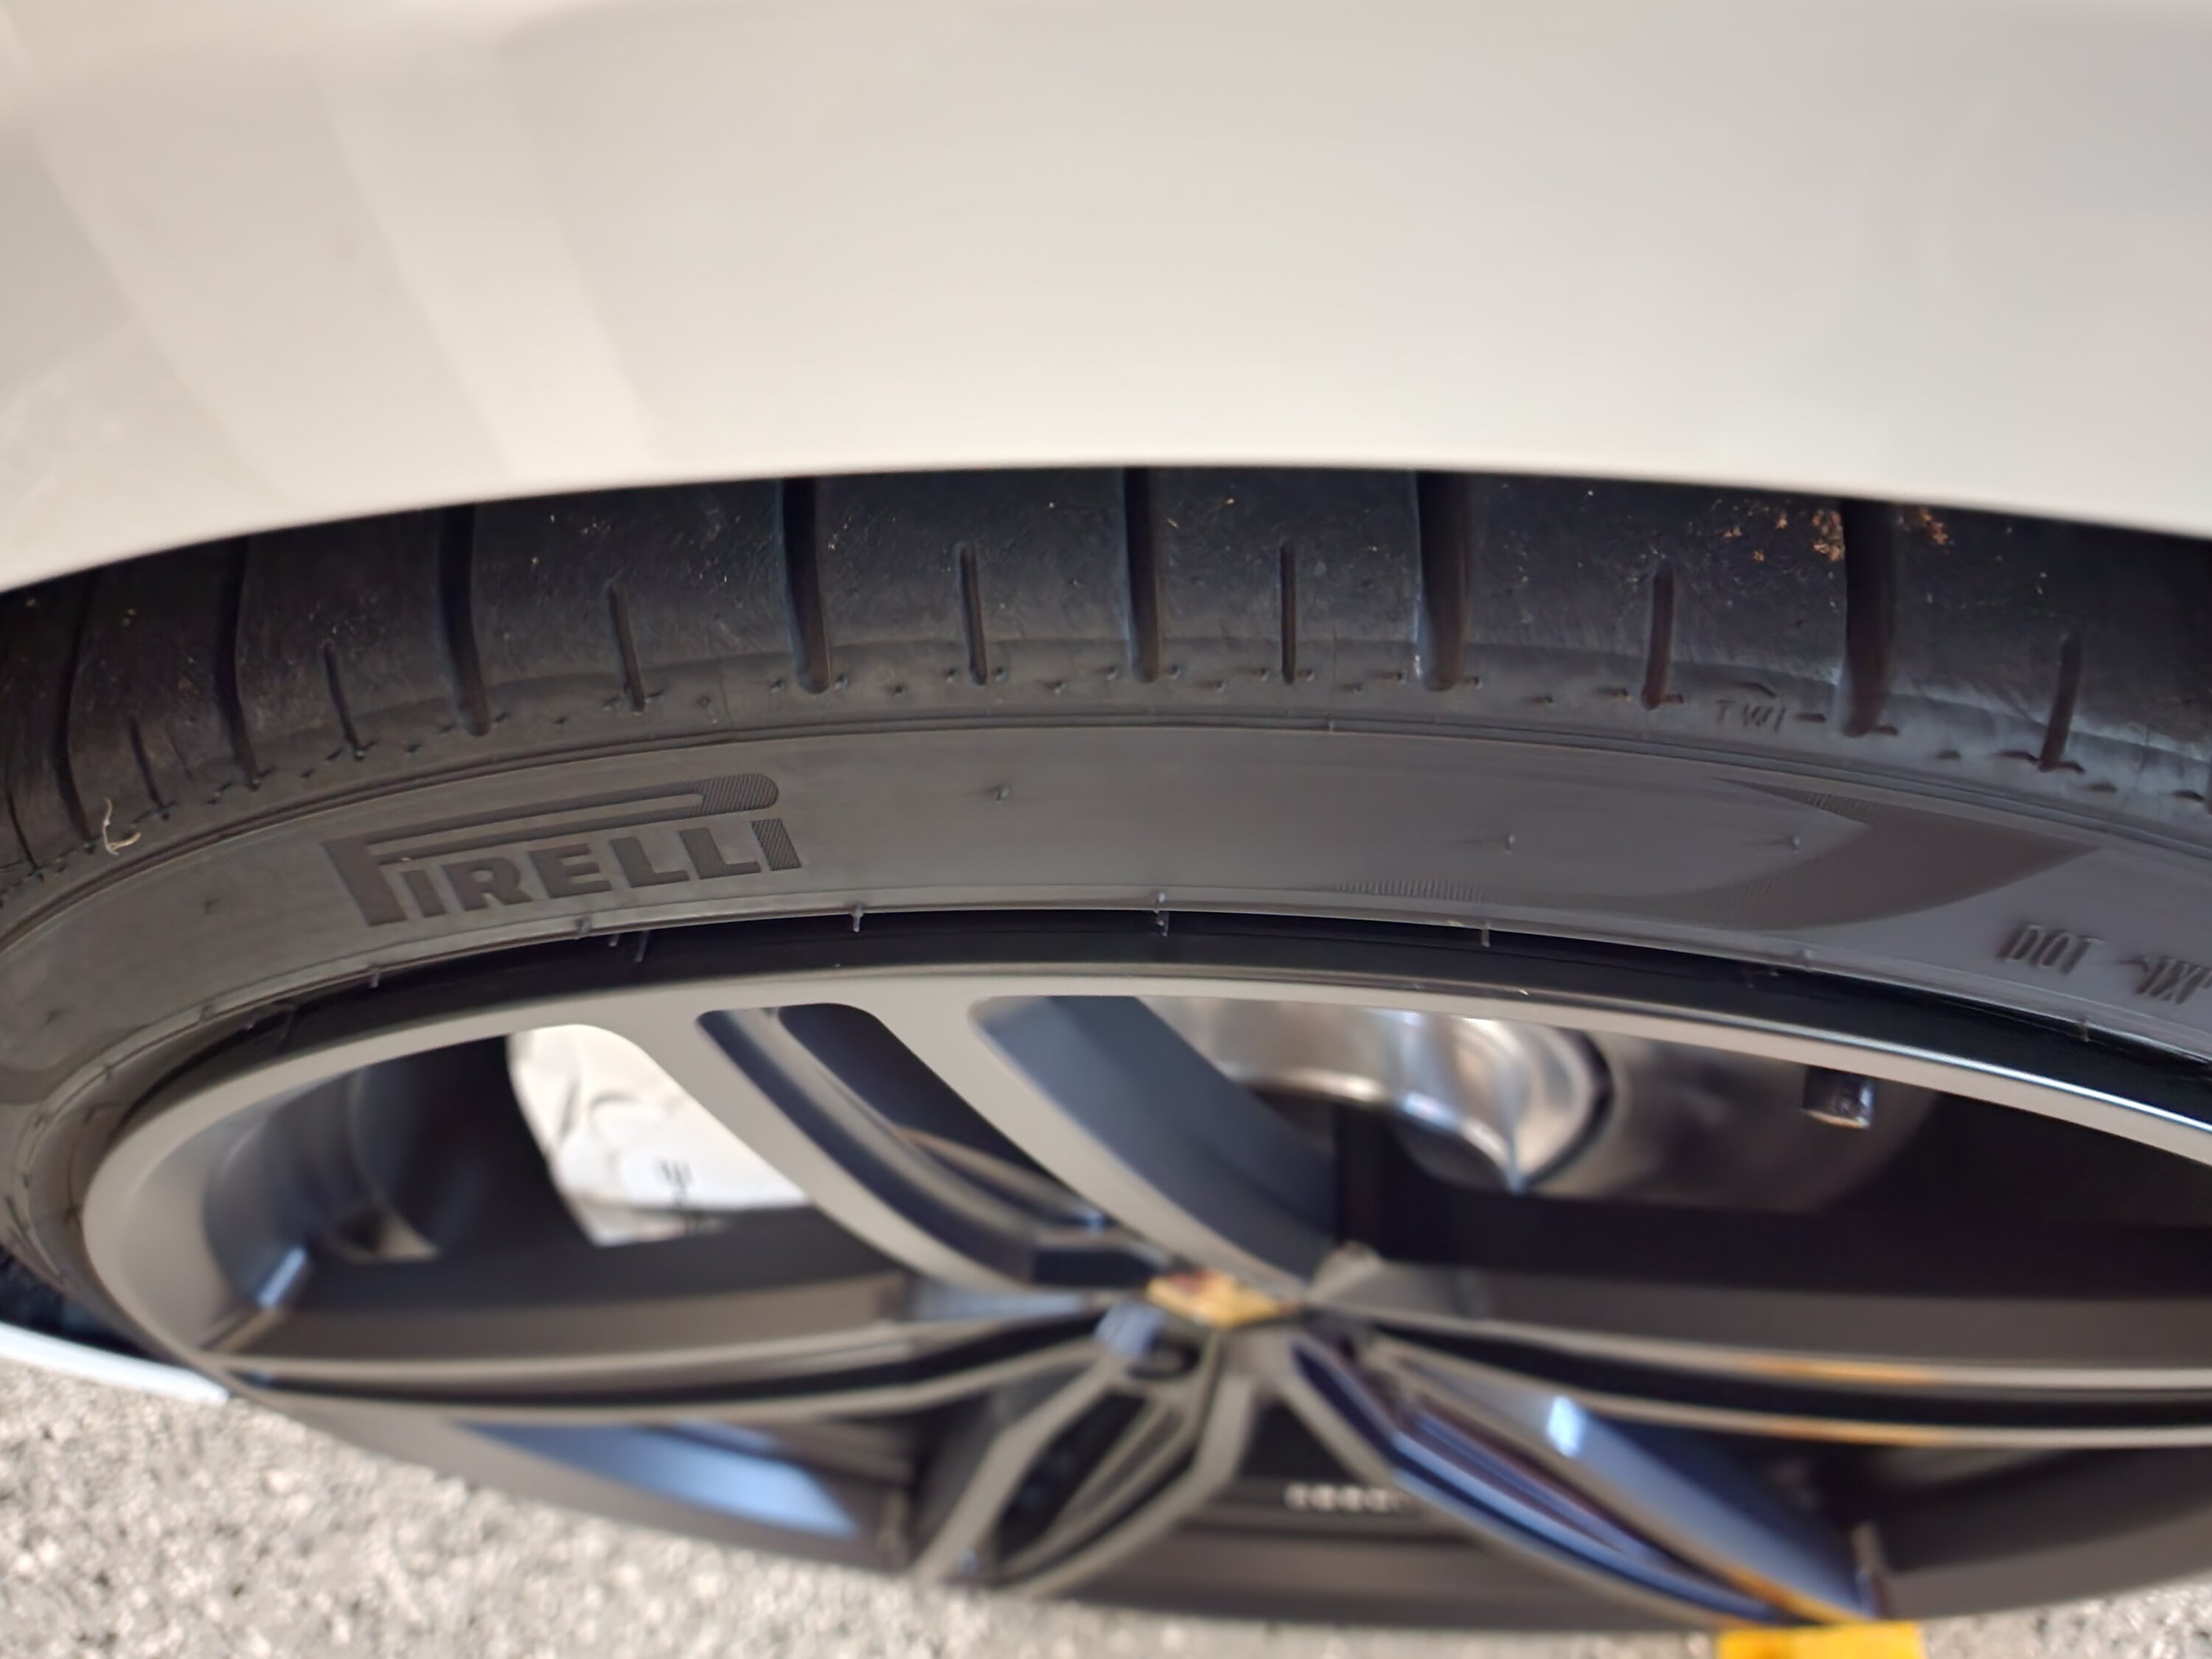 Porsche Taycan Need help with new 22 Inch Tire Sizes - MY20 Turbo 2022-09-13 12.57.12